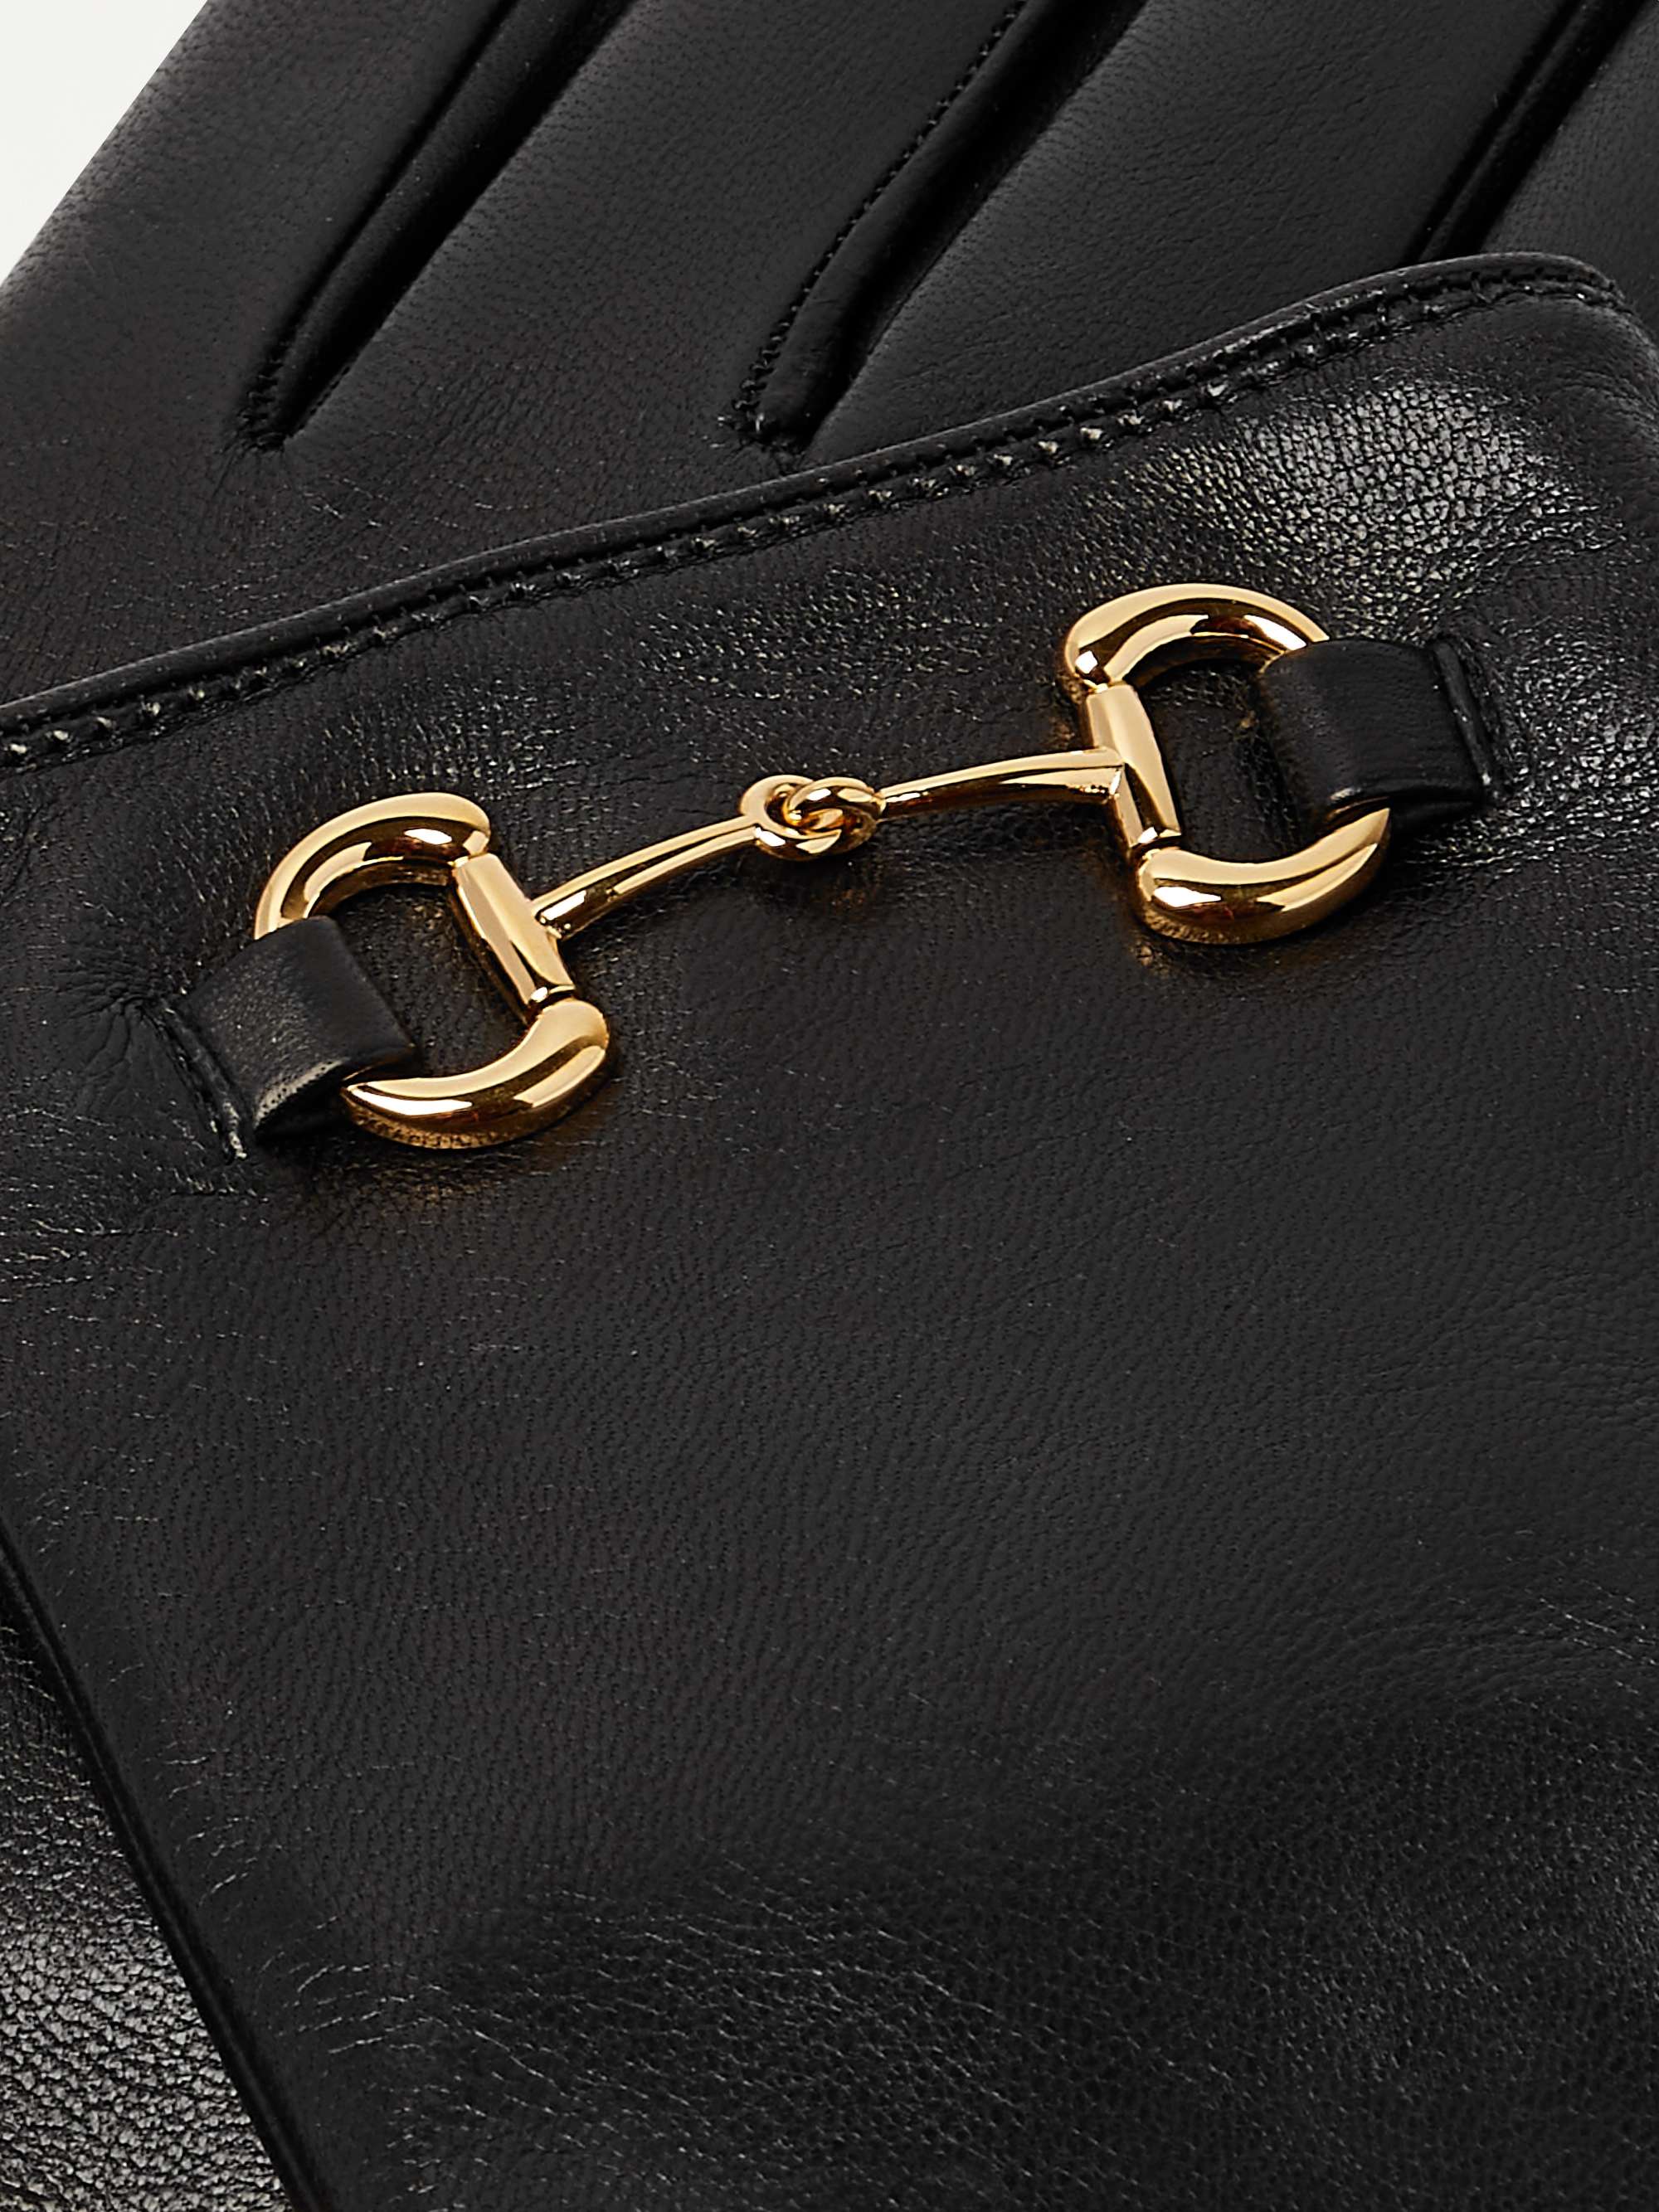 GUCCI Horsebit Cashmere-Lined Leather Gloves